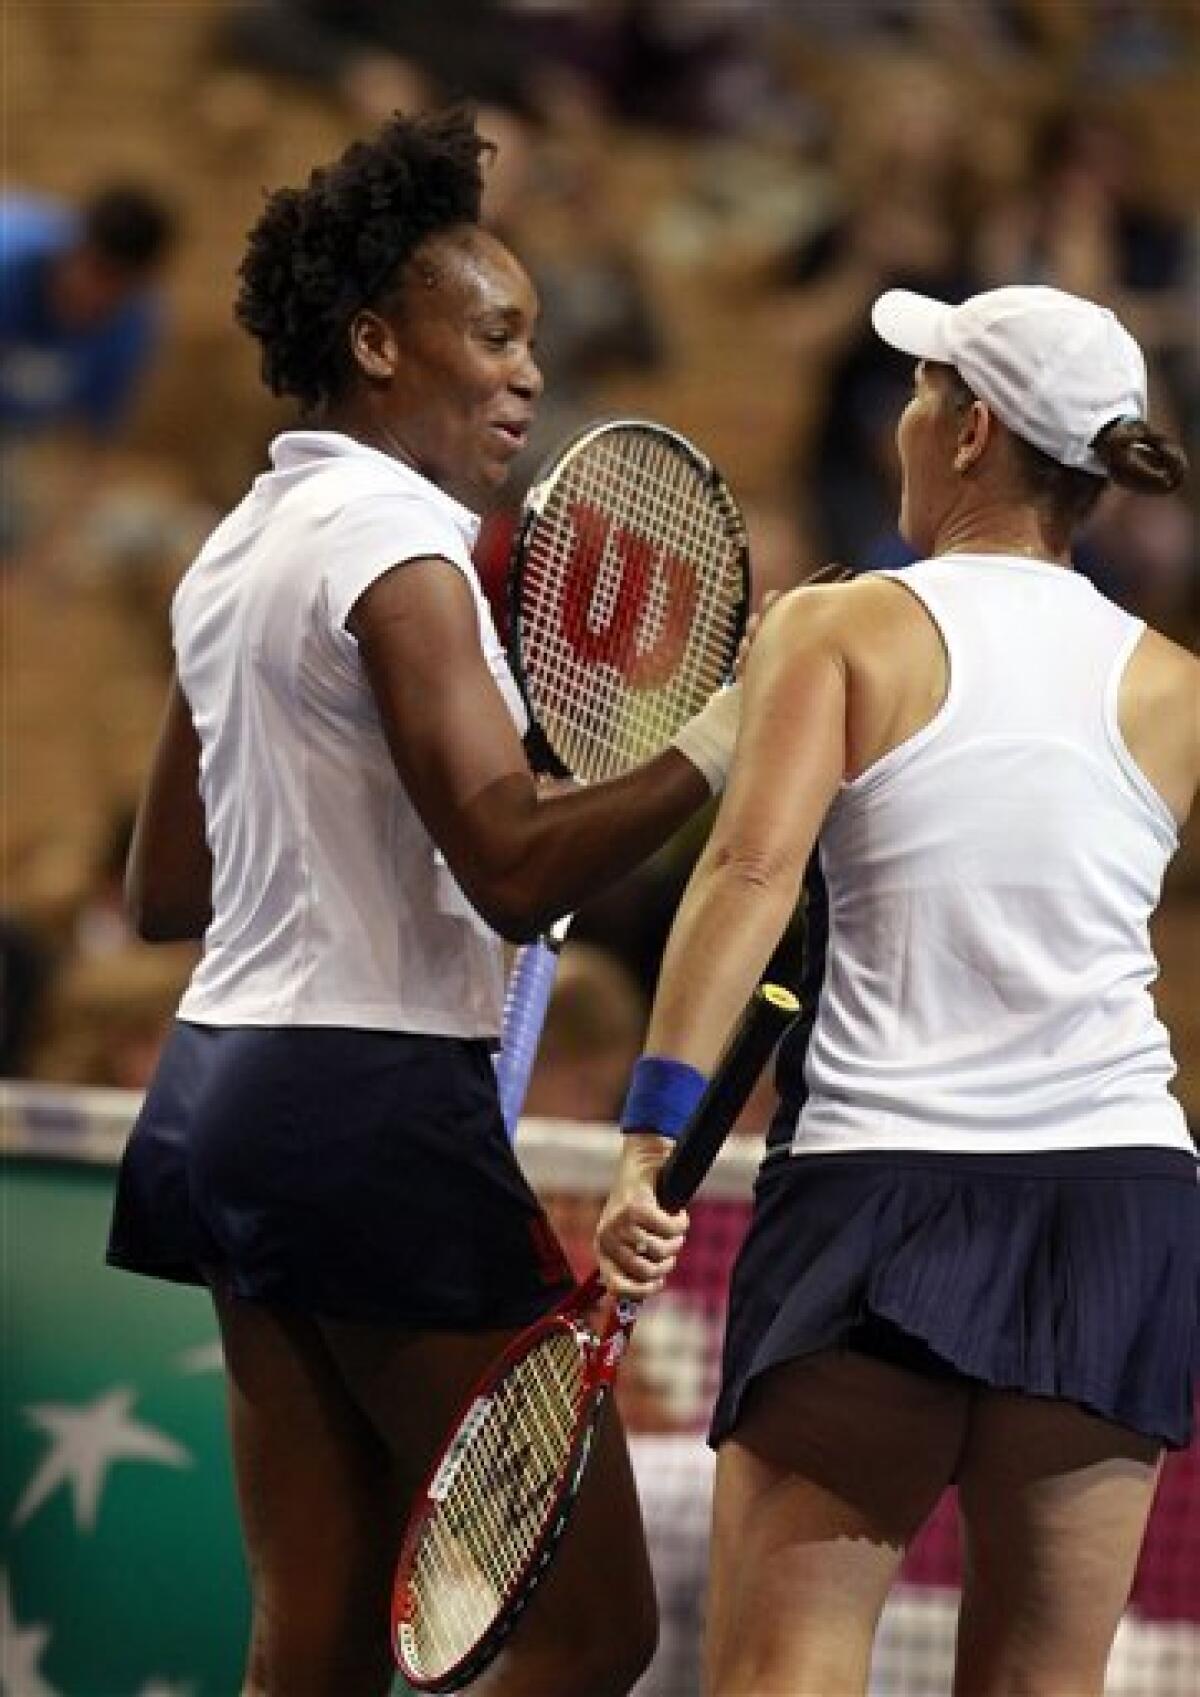 Venus Williams, left, celebrates after she and teammate Liezel Huber, right, defeated Anastasiya Yakimova and Darya Kustova, both of Belarus, during a doubles first-round Fed Cup tennis match in Worcester, Mass., Sunday, Feb. 5, 2012. The United States defeated Belarus 6-1, 6-2. (AP Photo/Steven Senne)